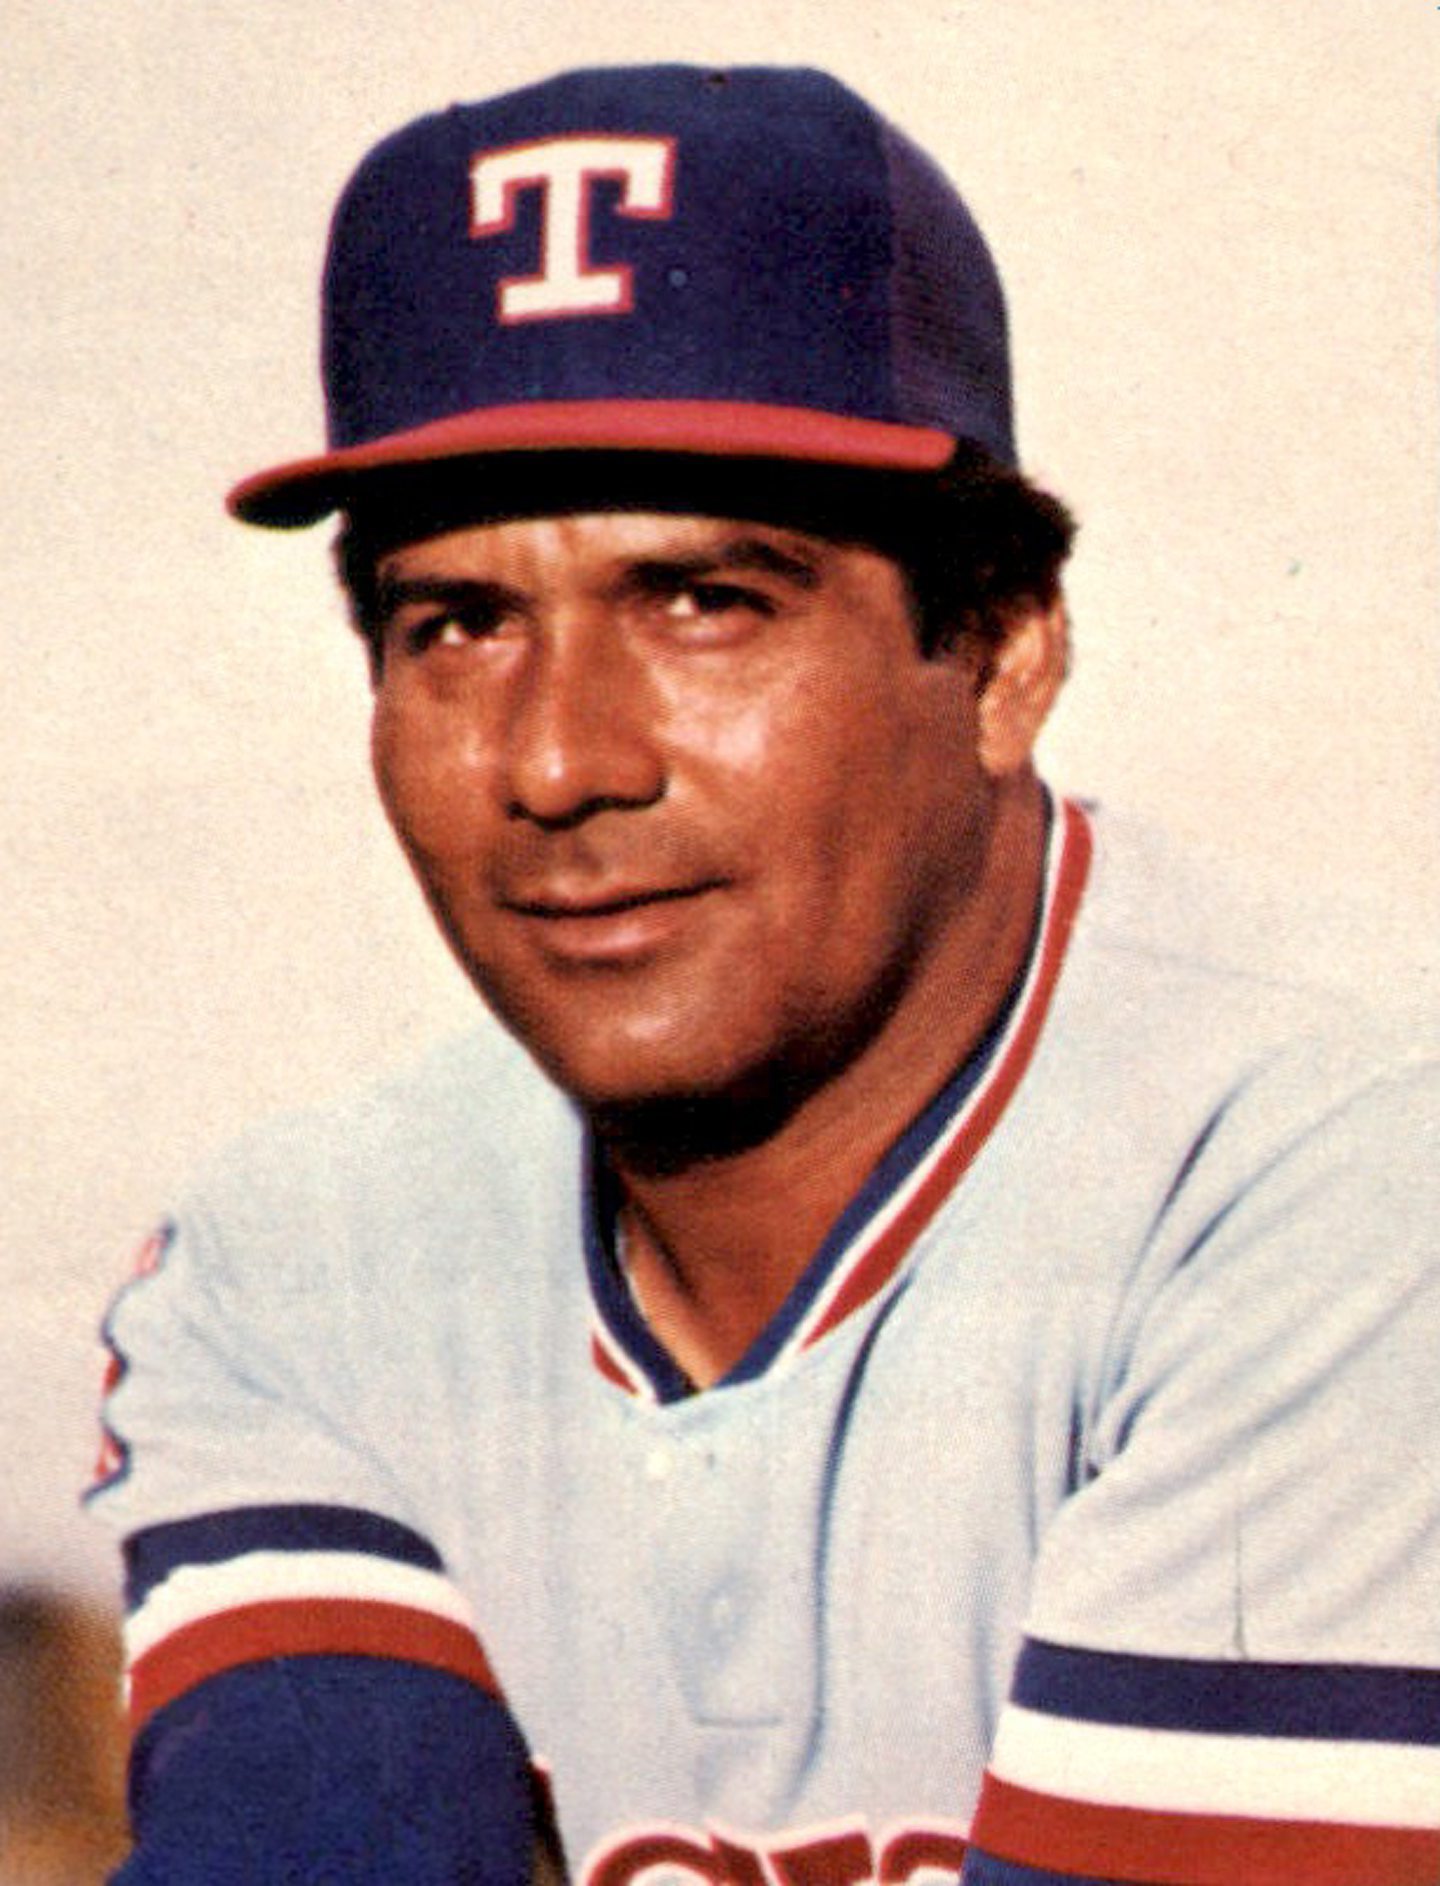 Cleveland Indians manager Pat Corrales in his baseball uniform